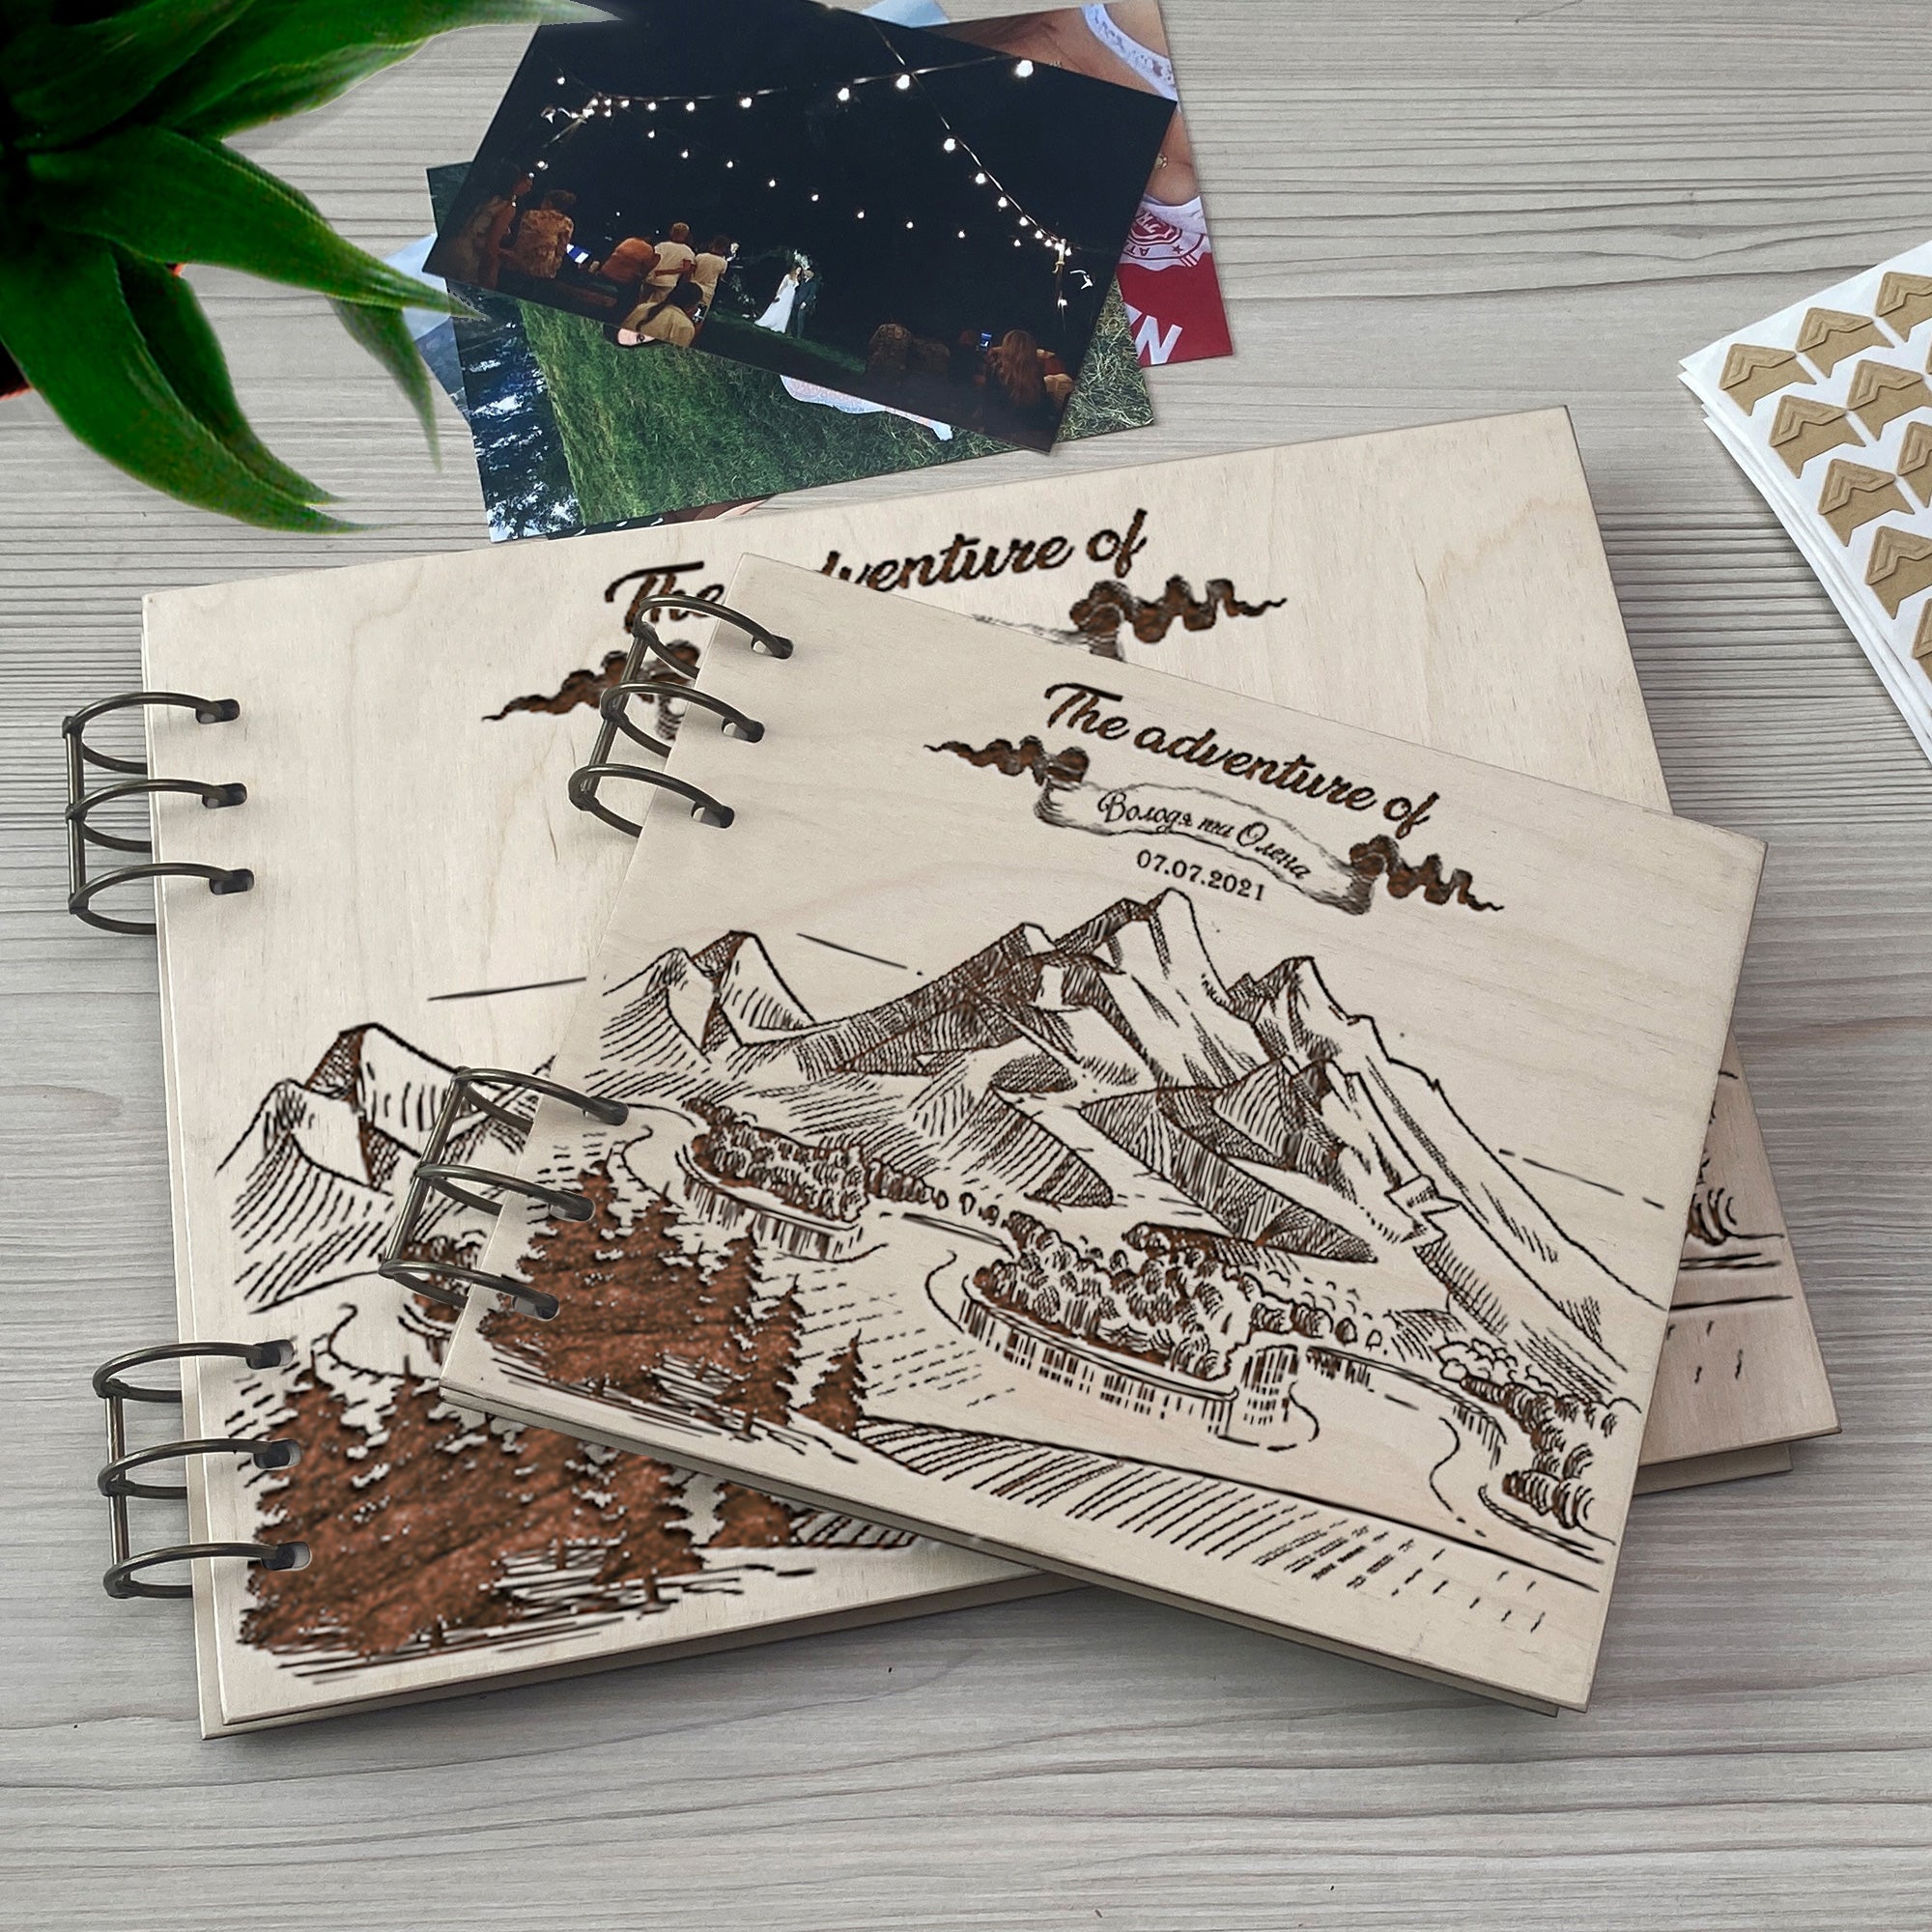 Personalized photo album cover and Mountain engraving